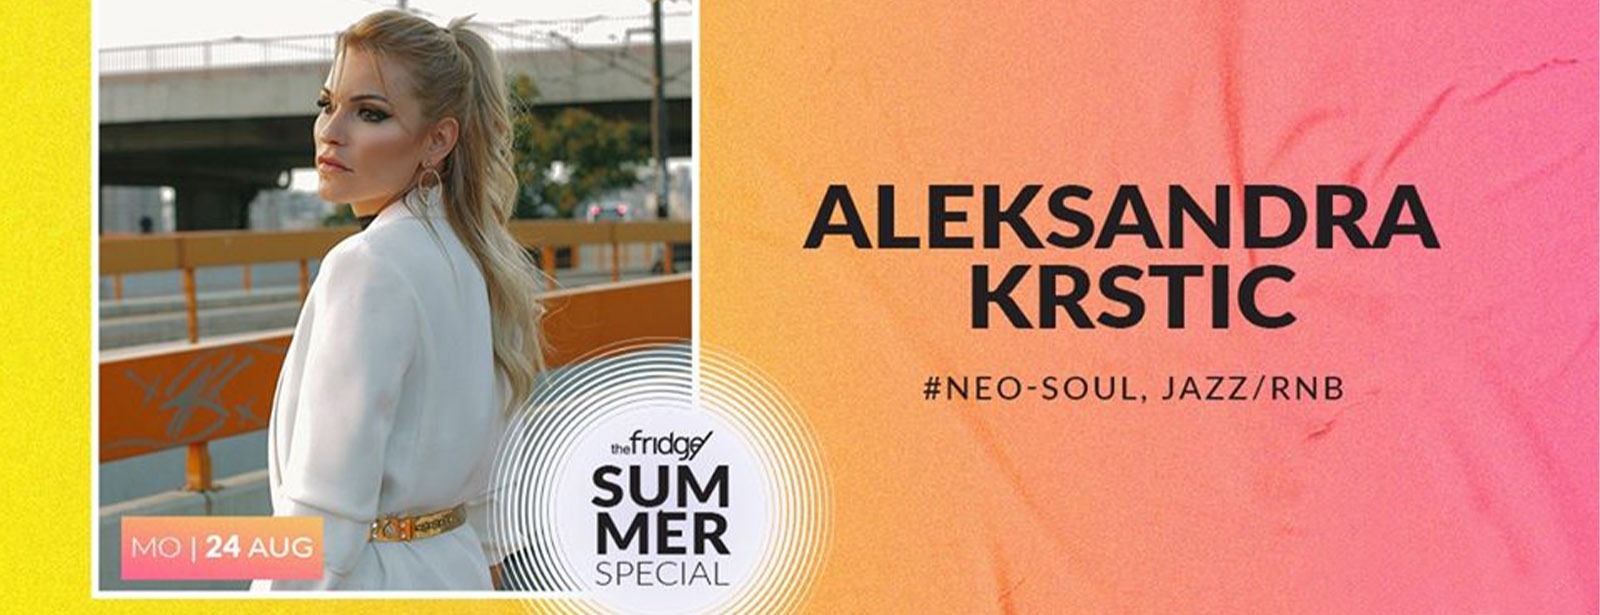 Aleksandra Krstic: Neo-Soul, Jazz and RnB at the Fridge - Coming Soon in UAE